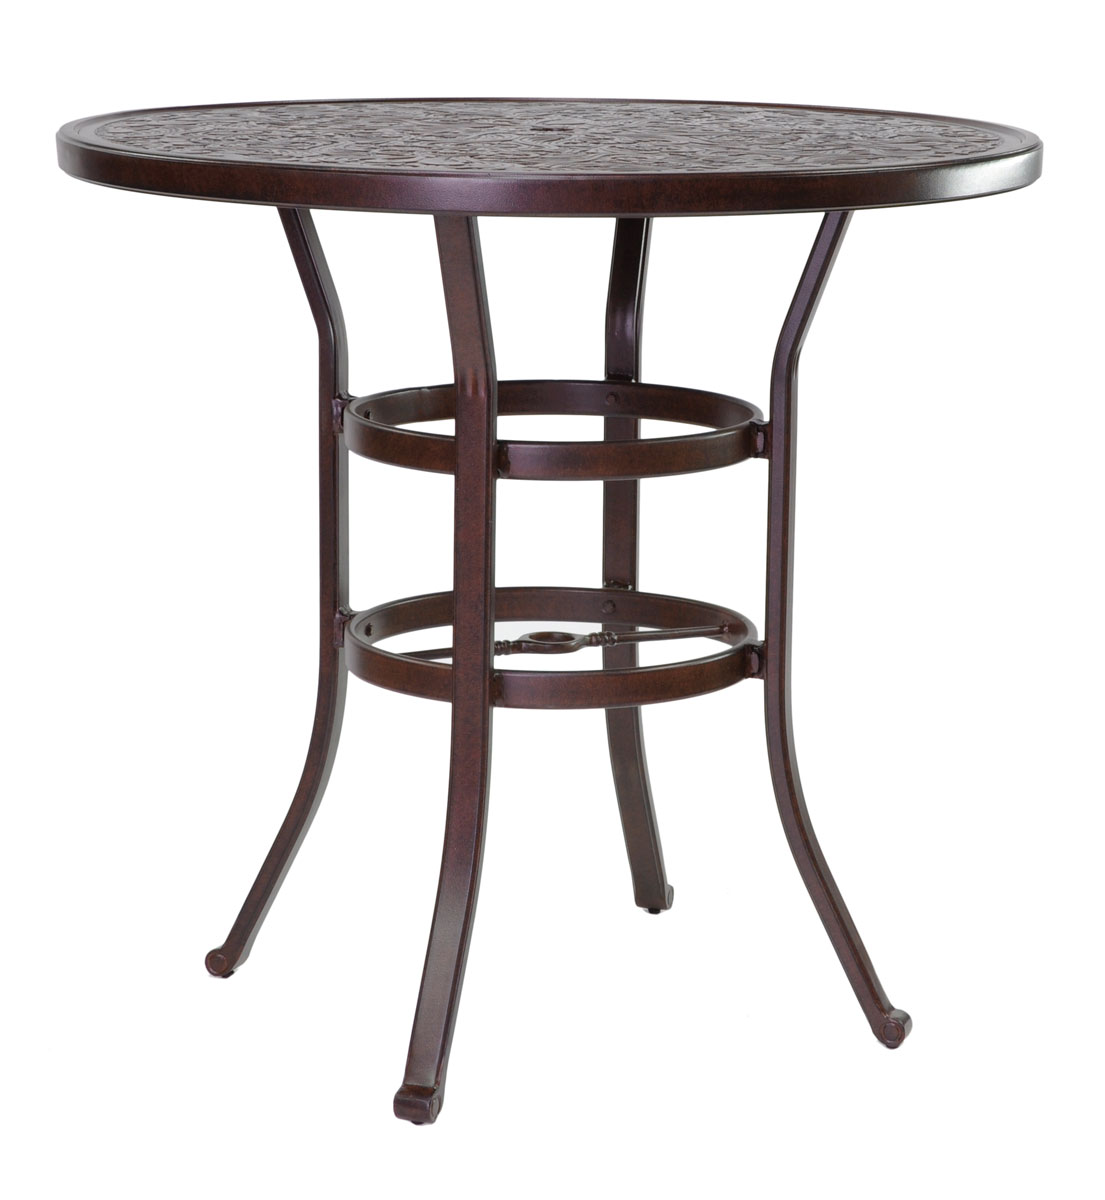 Castelle Vintage 42 inch Round Bar Height Table